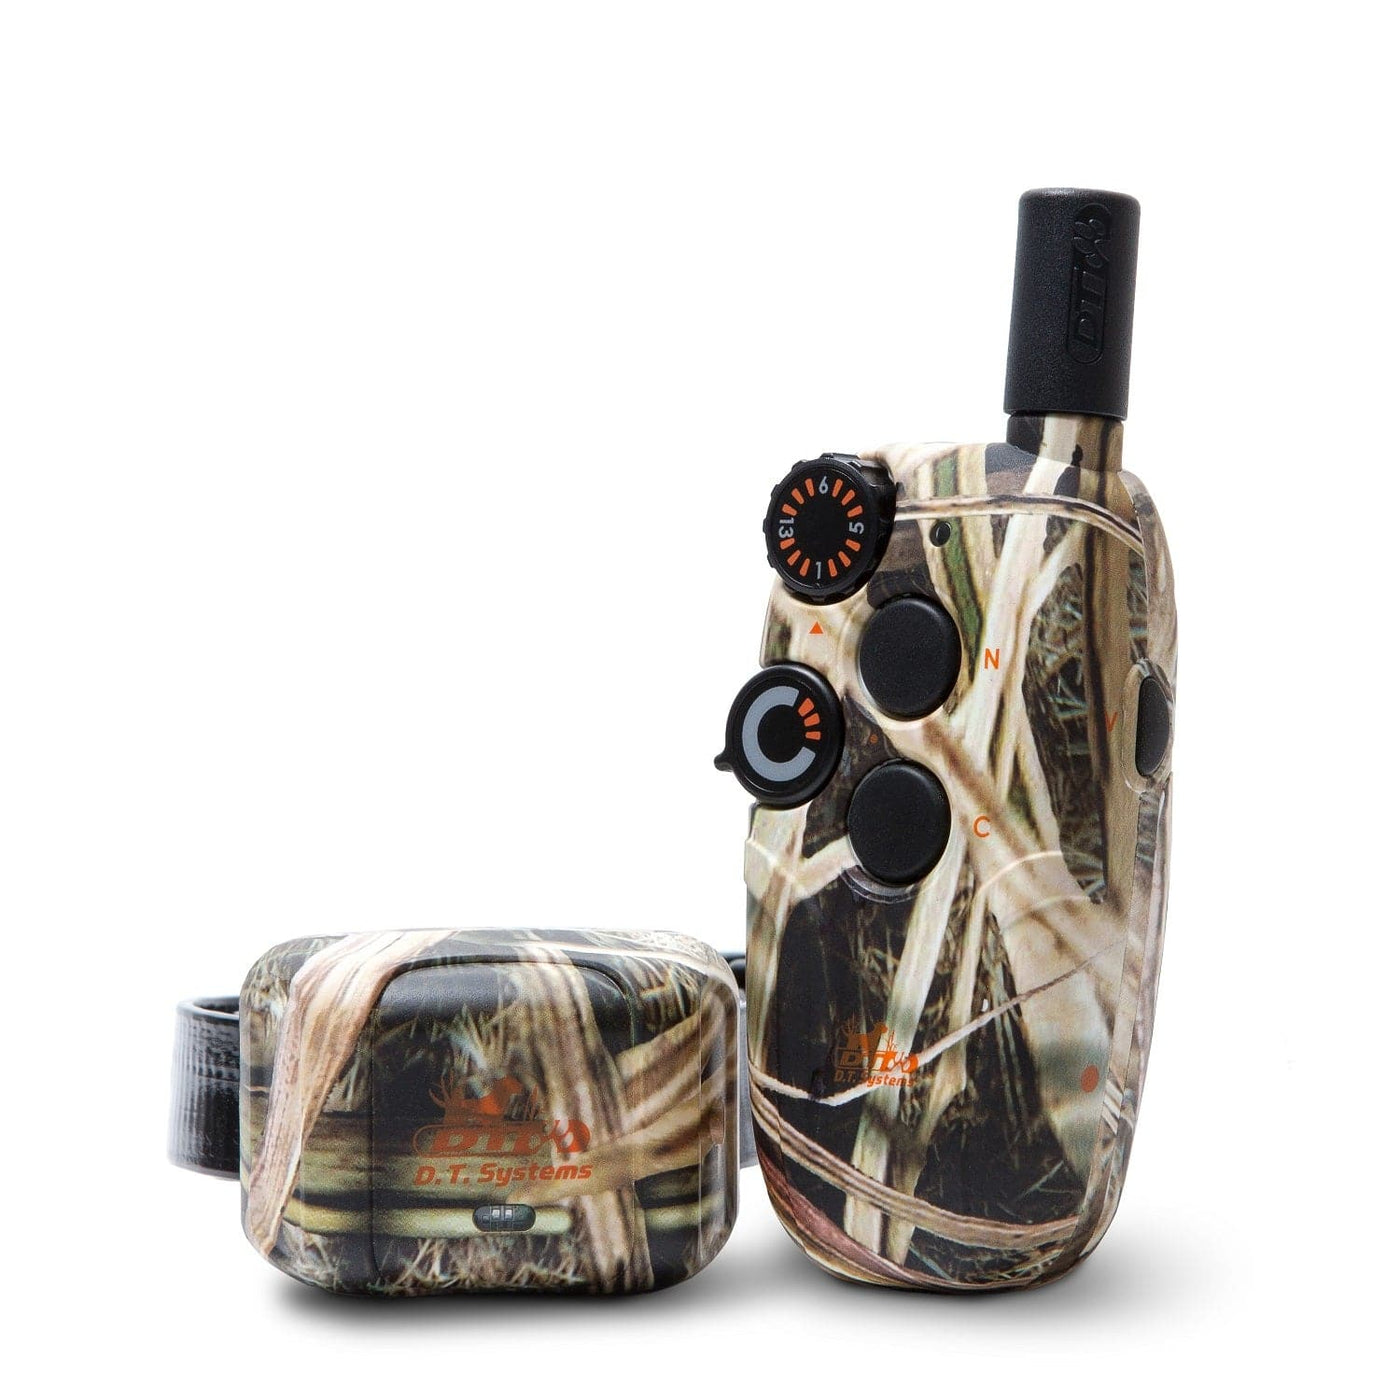 DT Systems D.T. Systems Master Retriever 1100 Camo Gifts And Novelty